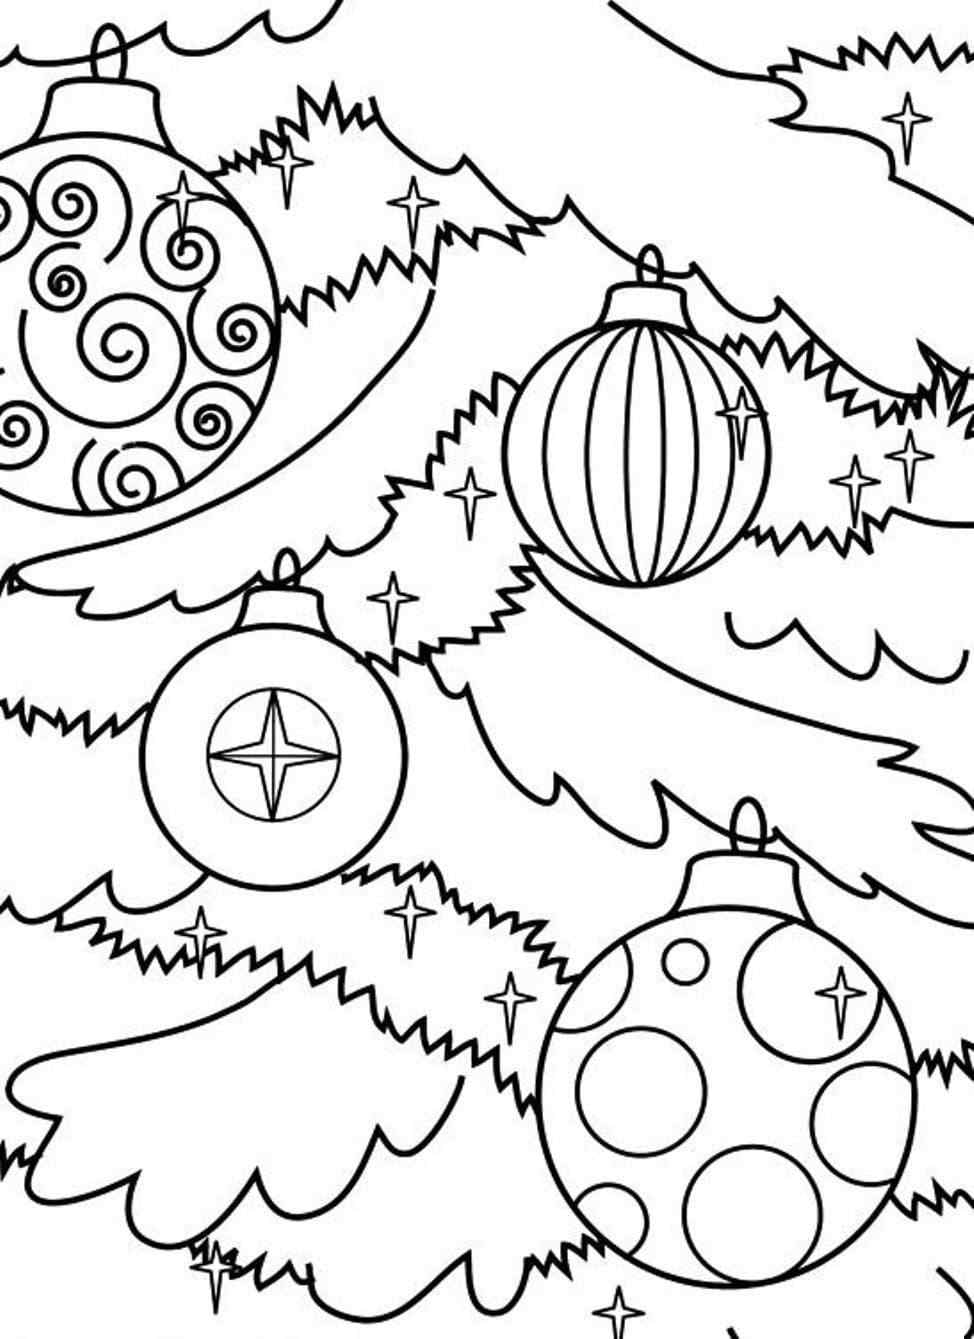 Toys In Ornaments Coloring Page